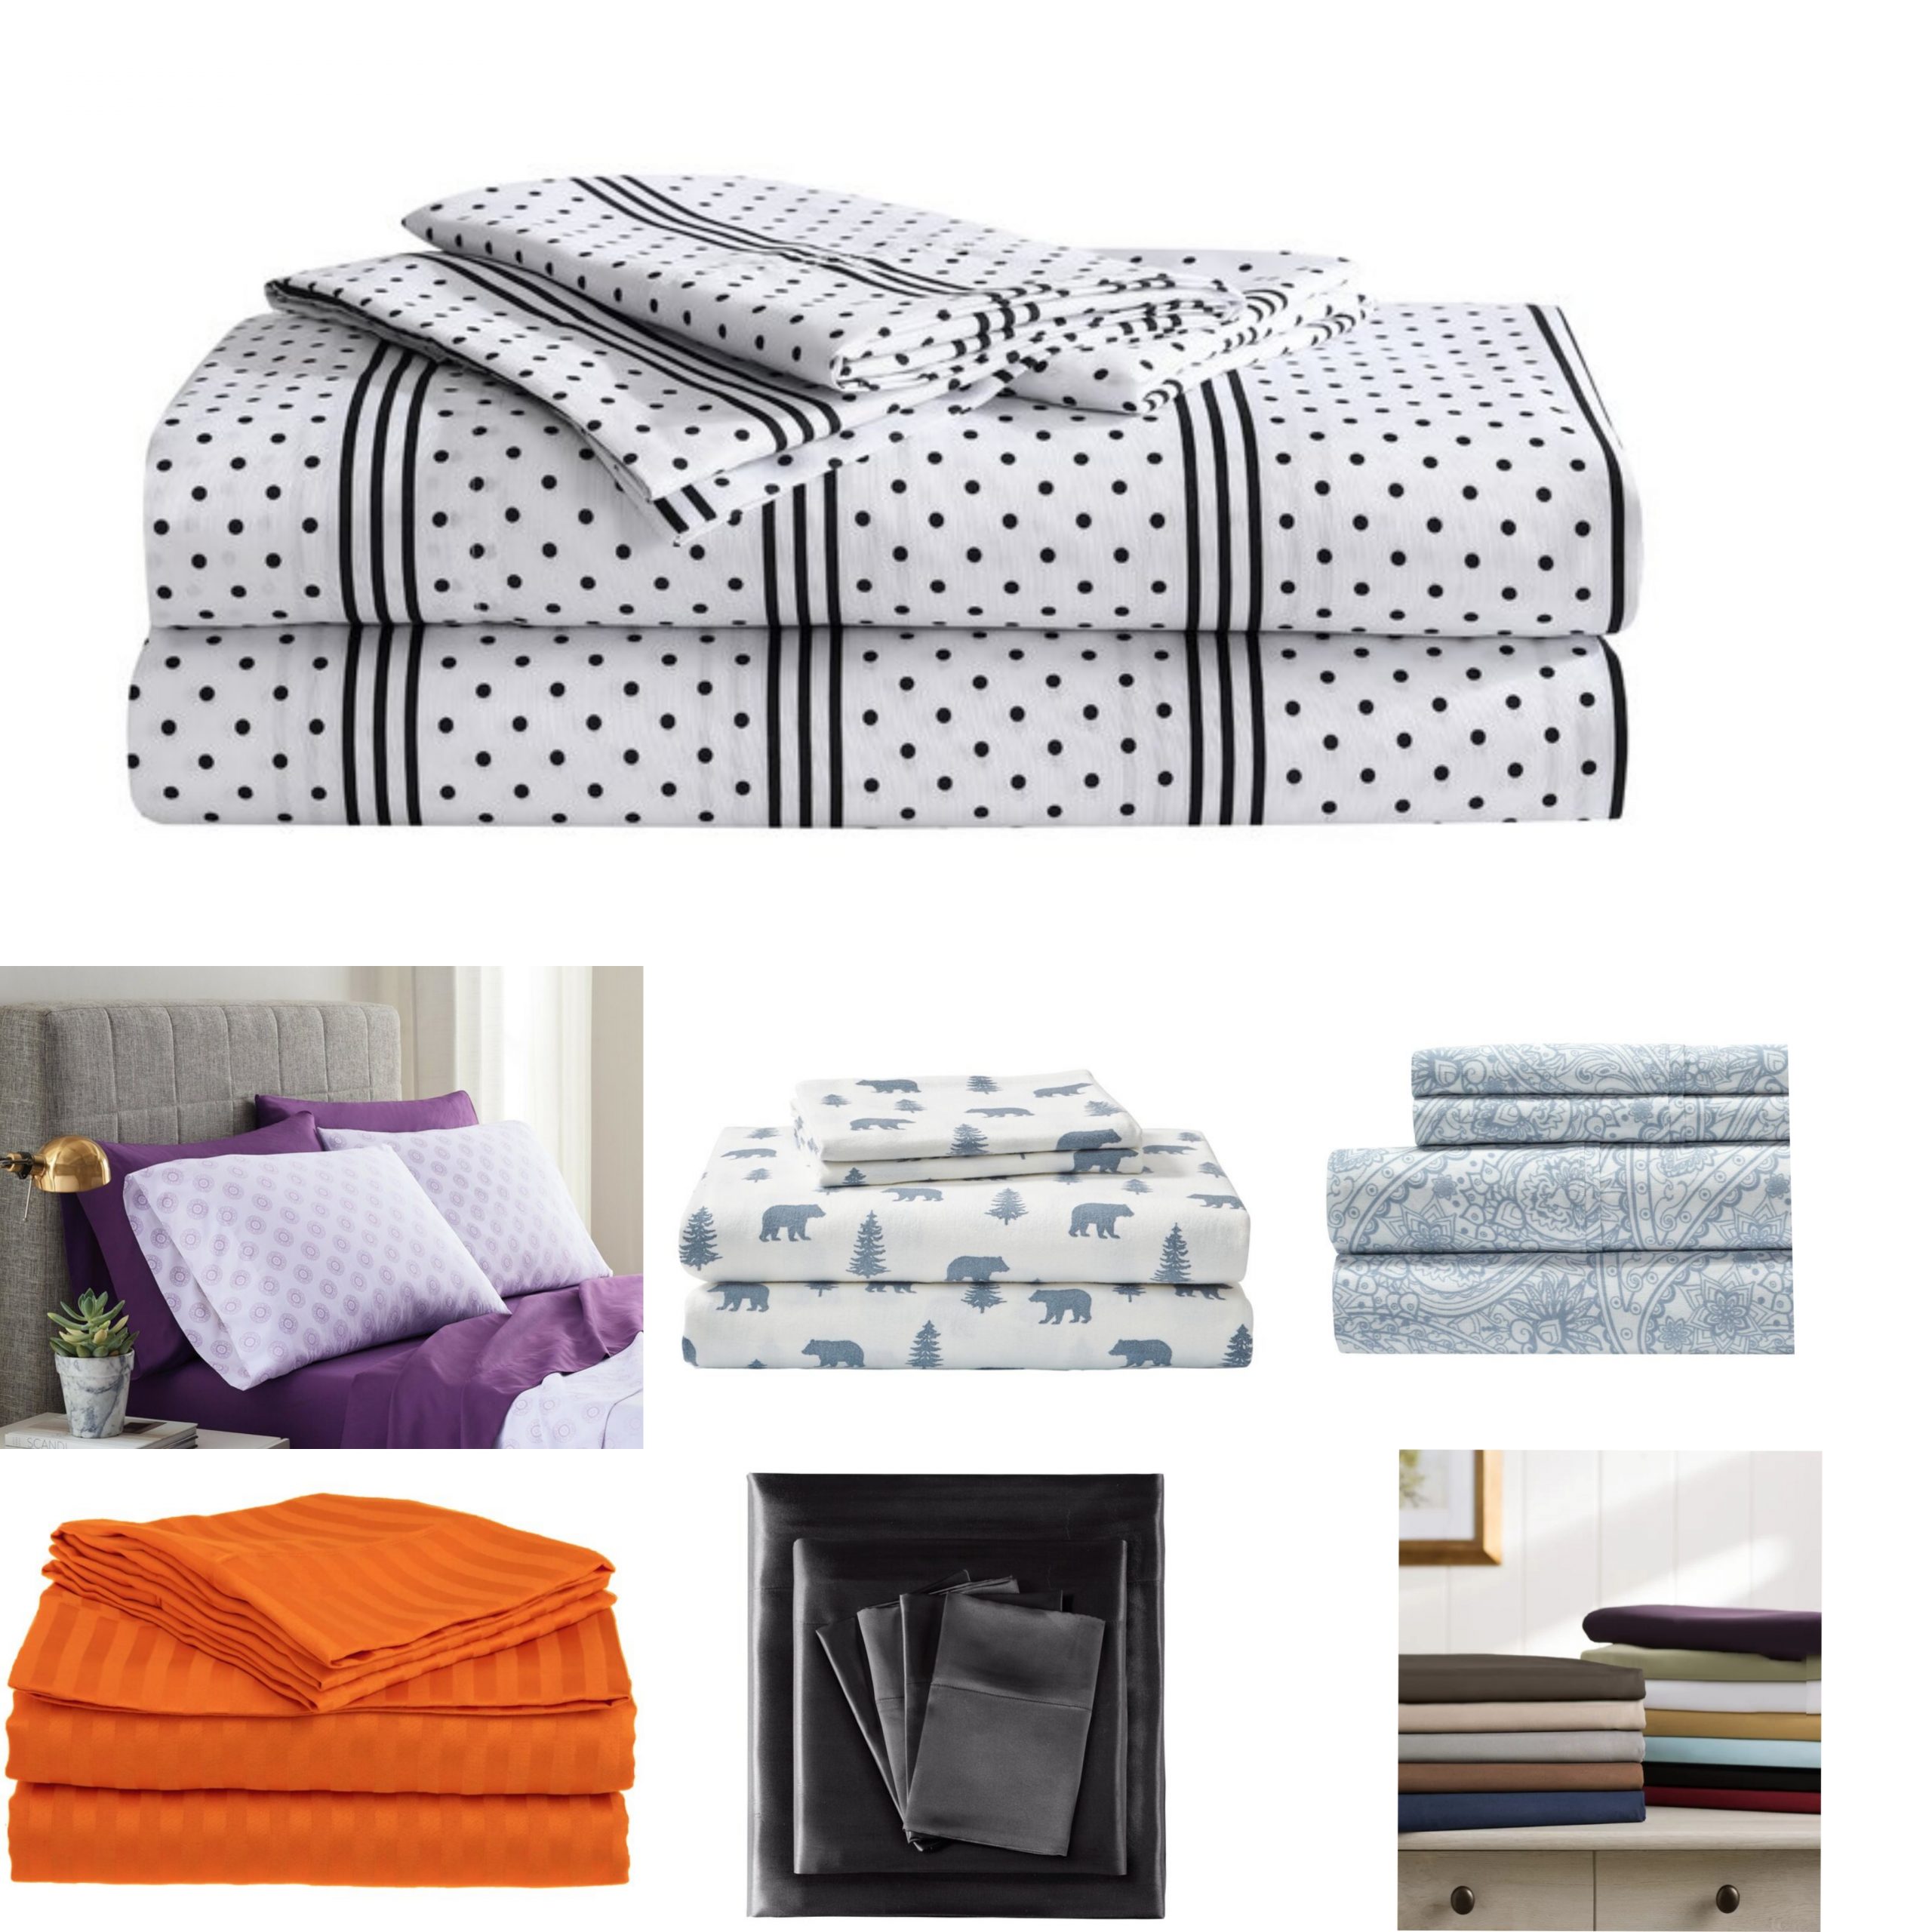 Sheet Sets with DOUBLE Discounts at Wayfair! Tons of Styles!